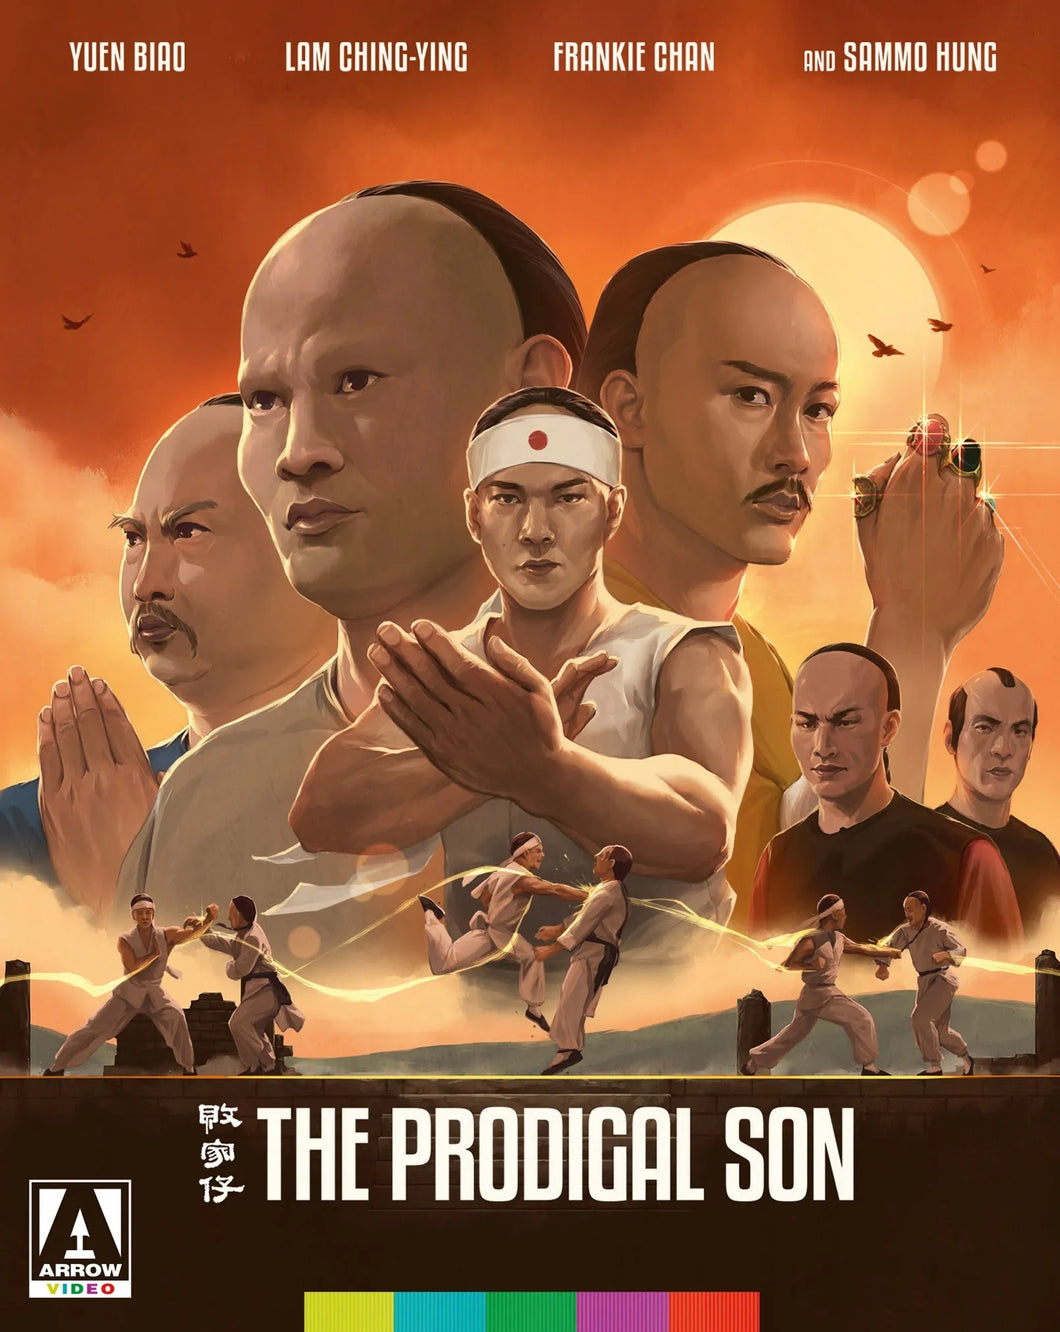 The Prodigal Son (1981) - front cover